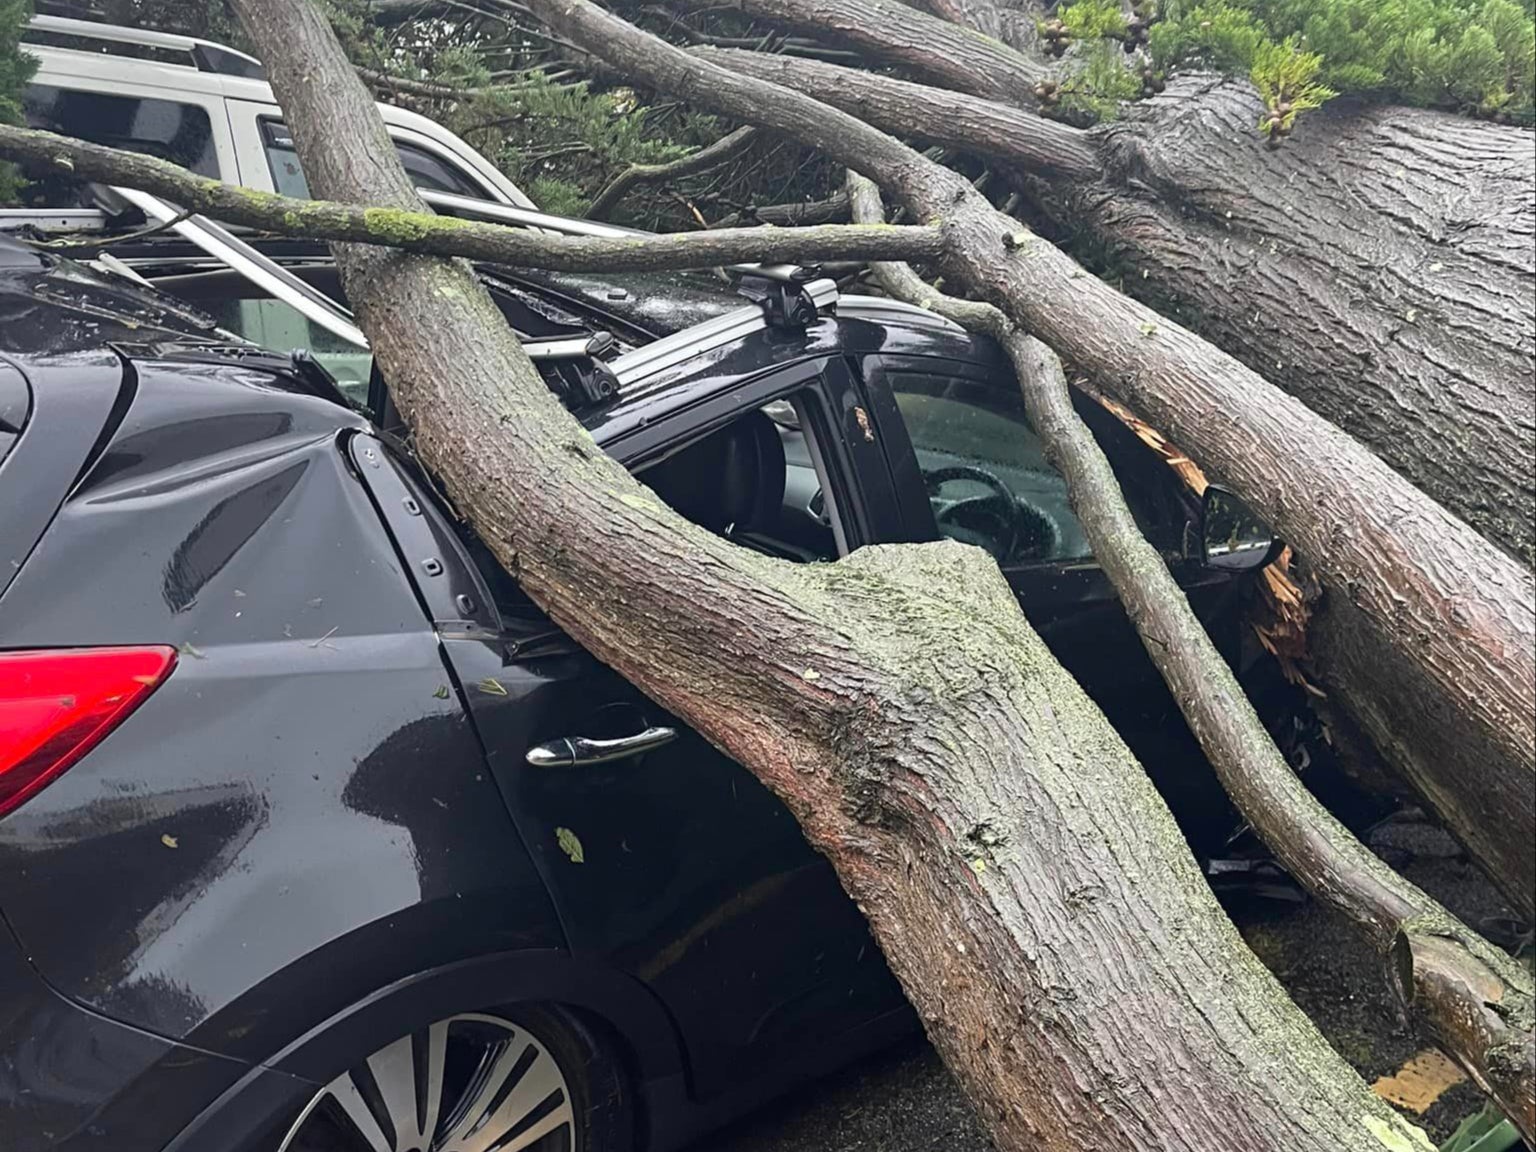 Cars, homes and buildings have been damaged as the storm hits the UK